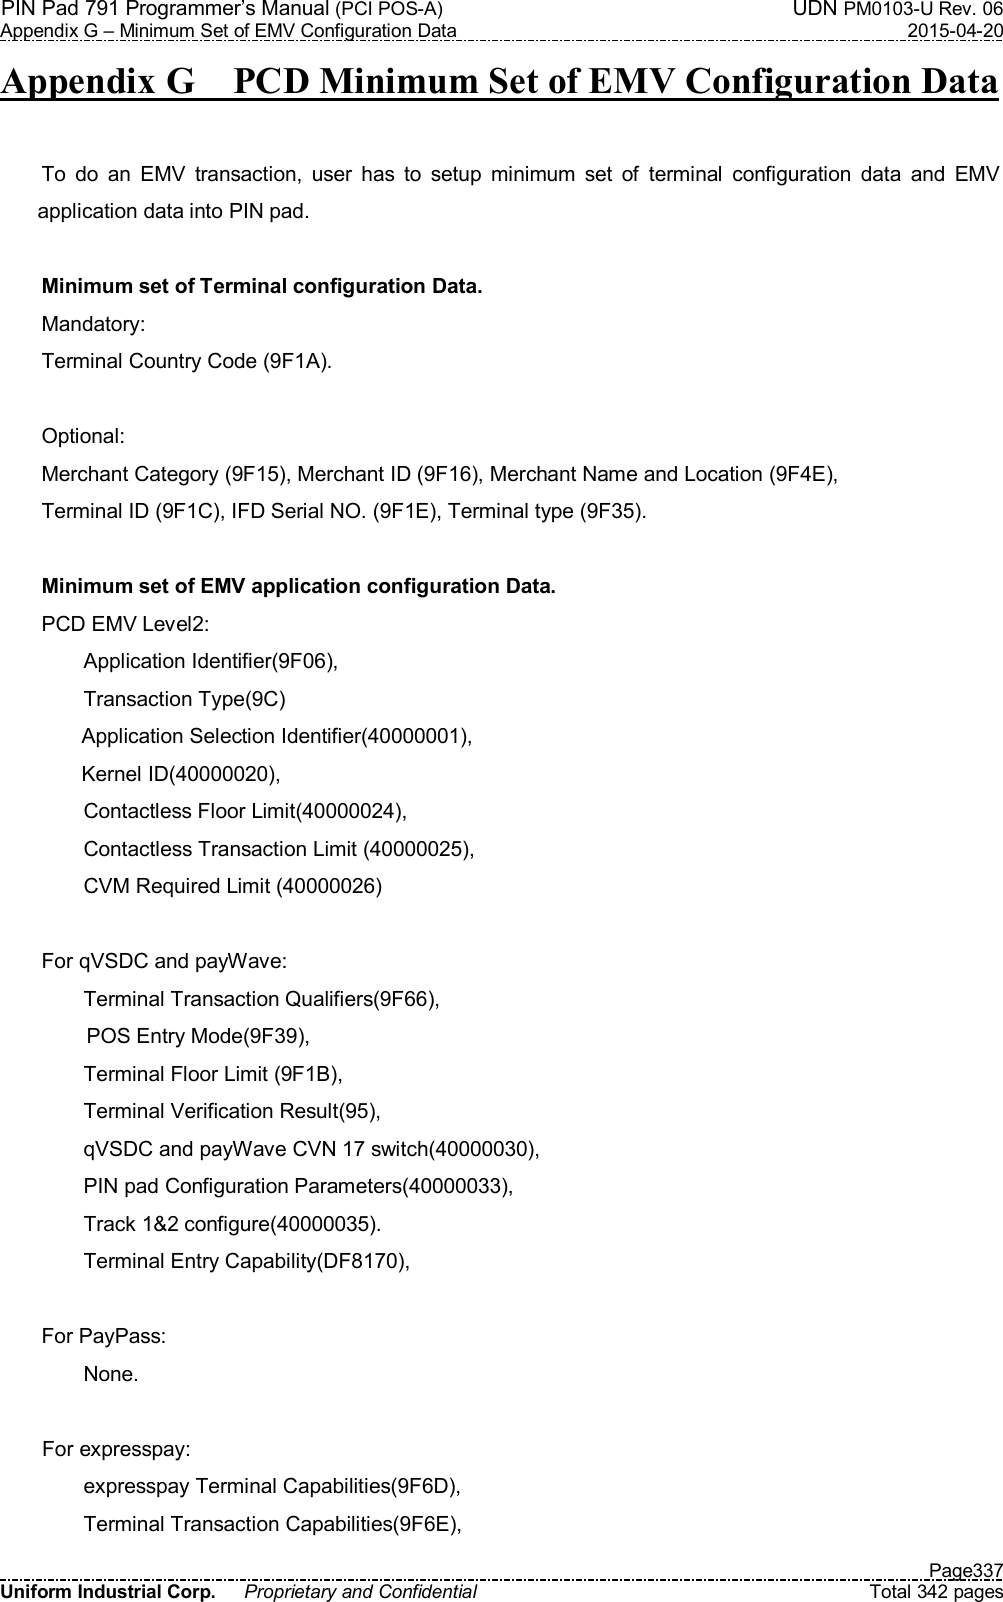 PIN Pad 791 Programmer’s Manual (PCI POS-A)  UDN PM0103-U Rev. 06 Appendix G – Minimum Set of EMV Configuration Data  2015-04-20   Page337 Uniform Industrial Corp.  Proprietary and Confidential  Total 342 pages Appendix G    PCD Minimum Set of EMV Configuration Data  To  do  an  EMV  transaction,  user  has  to  setup  minimum  set  of  terminal  configuration  data  and  EMV application data into PIN pad.  Minimum set of Terminal configuration Data. Mandatory: Terminal Country Code (9F1A).  Optional: Merchant Category (9F15), Merchant ID (9F16), Merchant Name and Location (9F4E), Terminal ID (9F1C), IFD Serial NO. (9F1E), Terminal type (9F35).  Minimum set of EMV application configuration Data. PCD EMV Level2: Application Identifier(9F06), Transaction Type(9C) Application Selection Identifier(40000001), Kernel ID(40000020),         Contactless Floor Limit(40000024), Contactless Transaction Limit (40000025), CVM Required Limit (40000026)  For qVSDC and payWave: Terminal Transaction Qualifiers(9F66), POS Entry Mode(9F39), Terminal Floor Limit (9F1B), Terminal Verification Result(95), qVSDC and payWave CVN 17 switch(40000030), PIN pad Configuration Parameters(40000033), Track 1&amp;2 configure(40000035). Terminal Entry Capability(DF8170),  For PayPass: None.  For expresspay: expresspay Terminal Capabilities(9F6D), Terminal Transaction Capabilities(9F6E), 